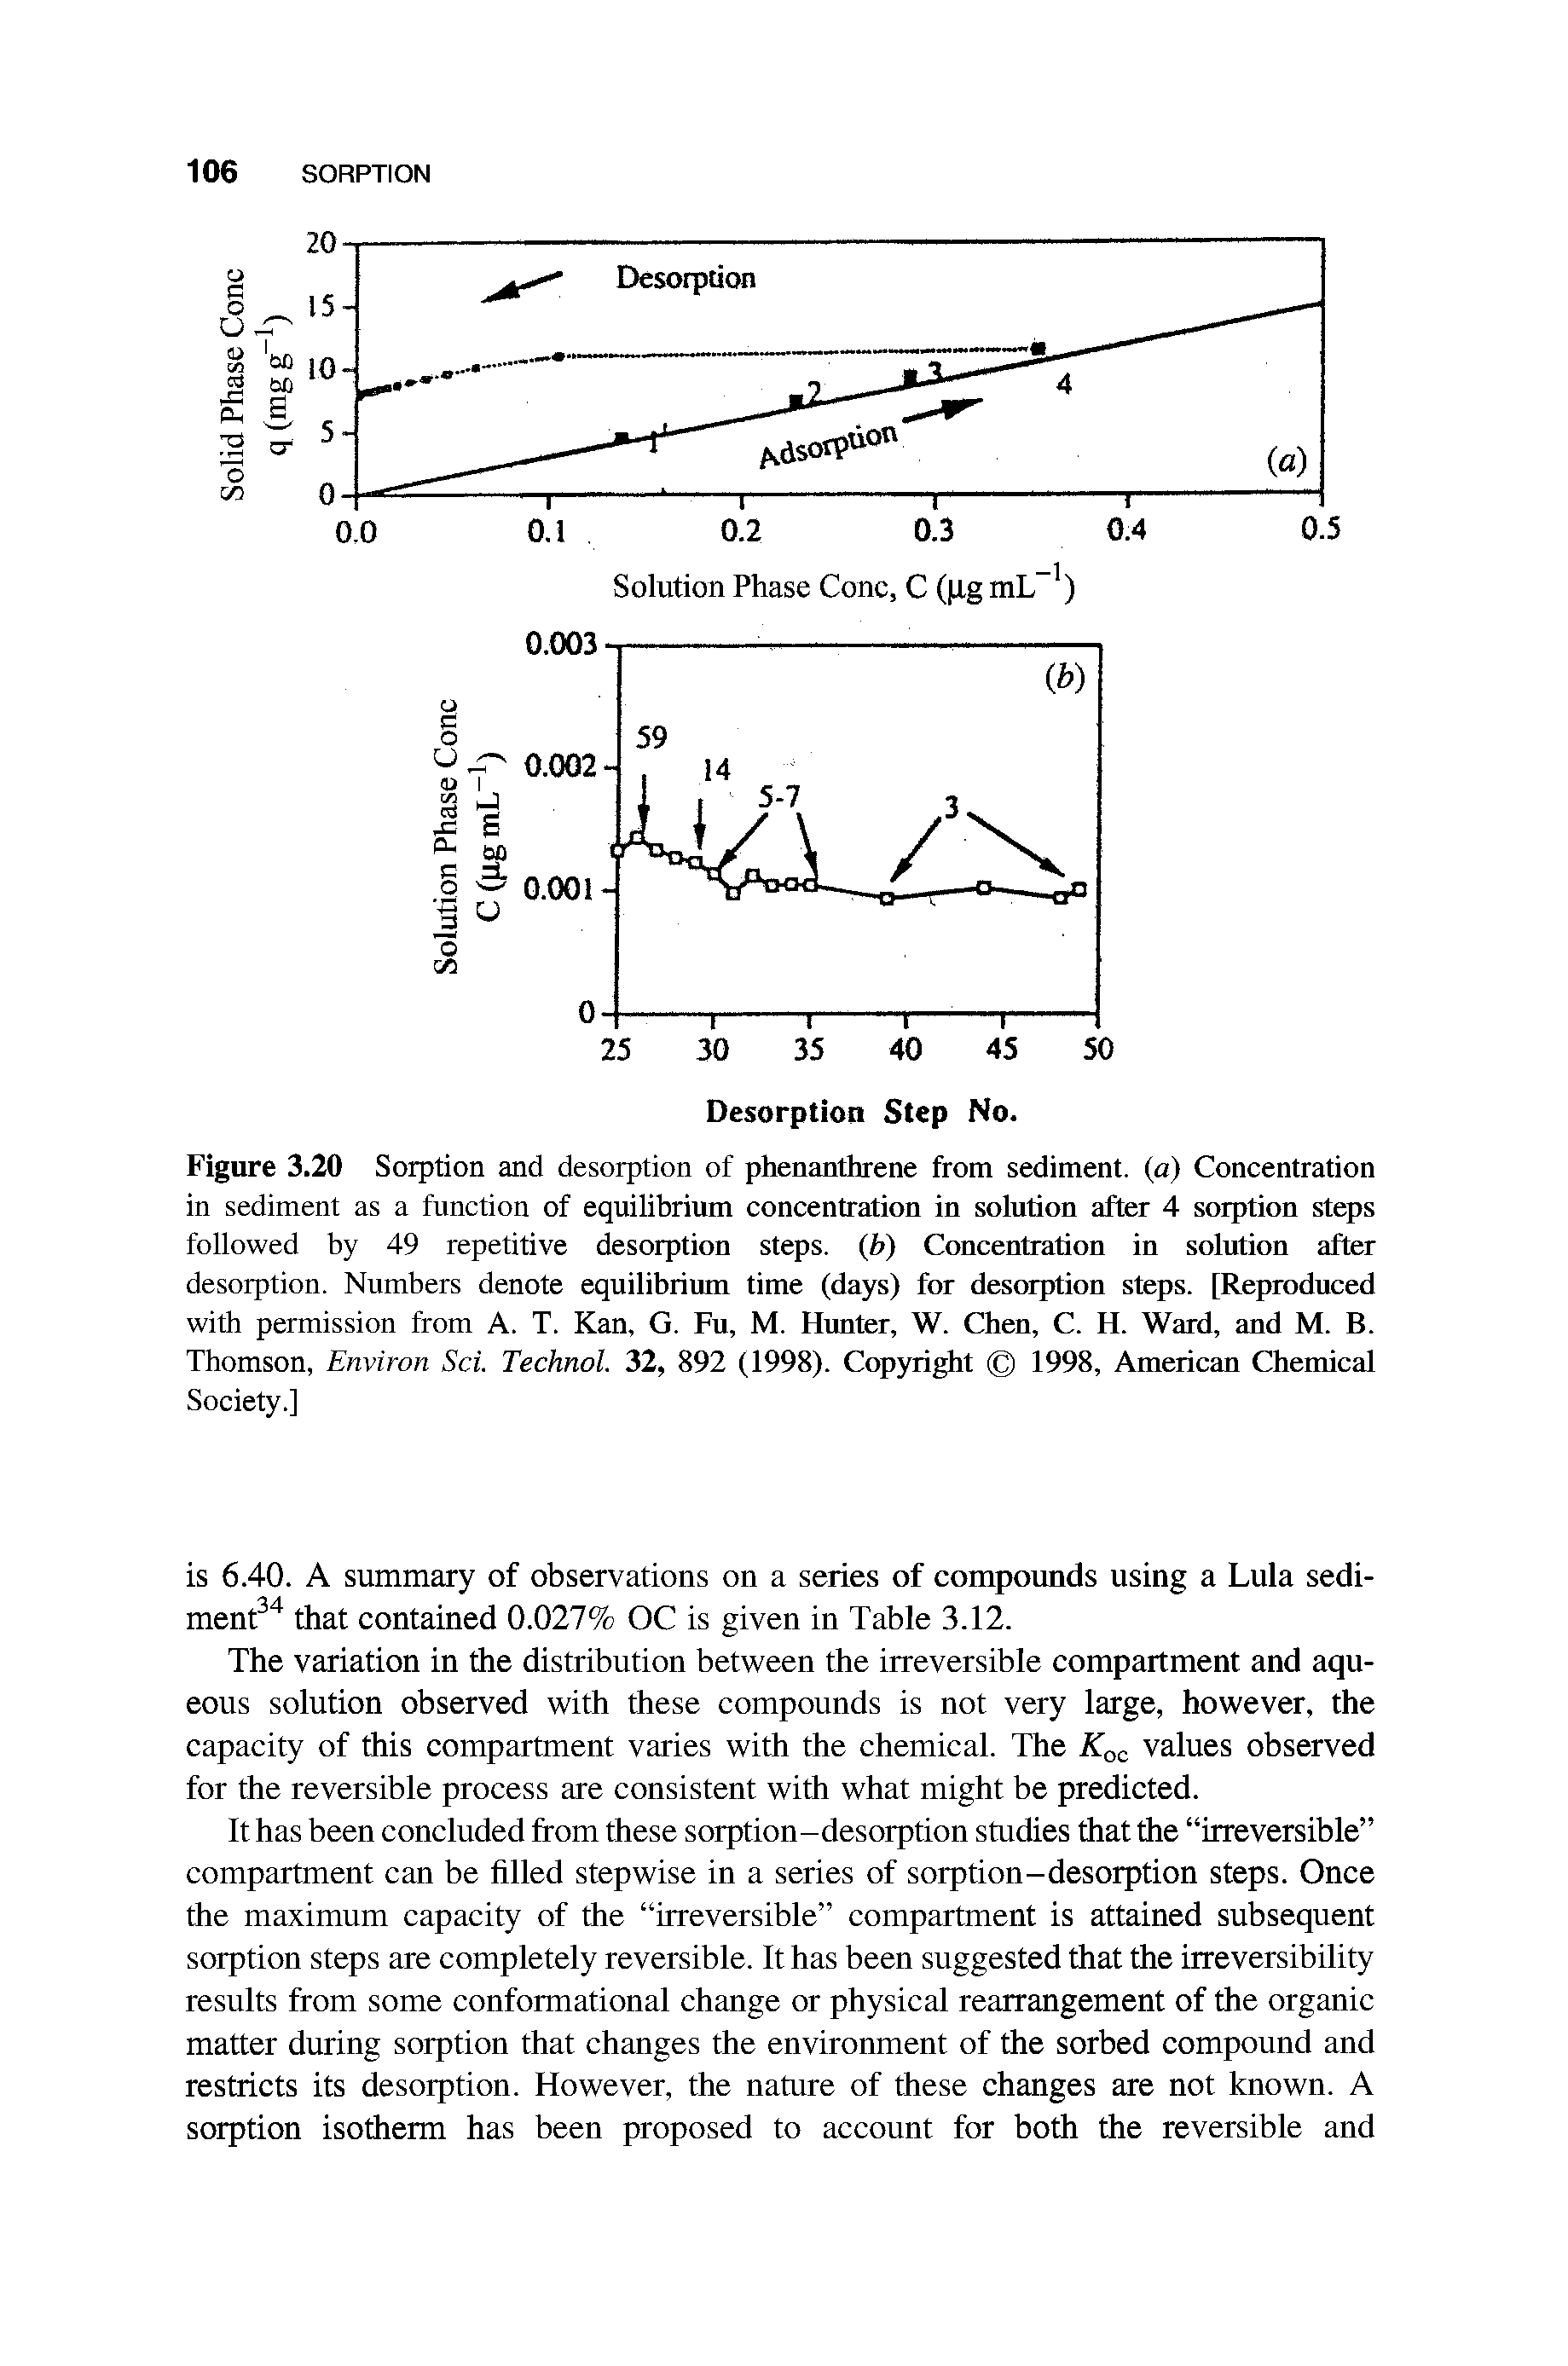 Figure 3.20 Sorption and desorption of phenanthrene from sediment, (a) Concentration in sediment as a function of equilibrium concentration in solution after 4 sorption steps followed by 49 repetitive desorption steps, (b) Concentration in solution after desorption. Numbers denote equilibrium time (days) for desorption steps. [Reproduced with permission from A. T. Kan, G. Fu, M. Hunter, W. Chen, C. H. Ward, and M. B. Thomson, Environ Sci. Technol. 32, 892 (1998). Copyright 1998, American Chemical Society.]...